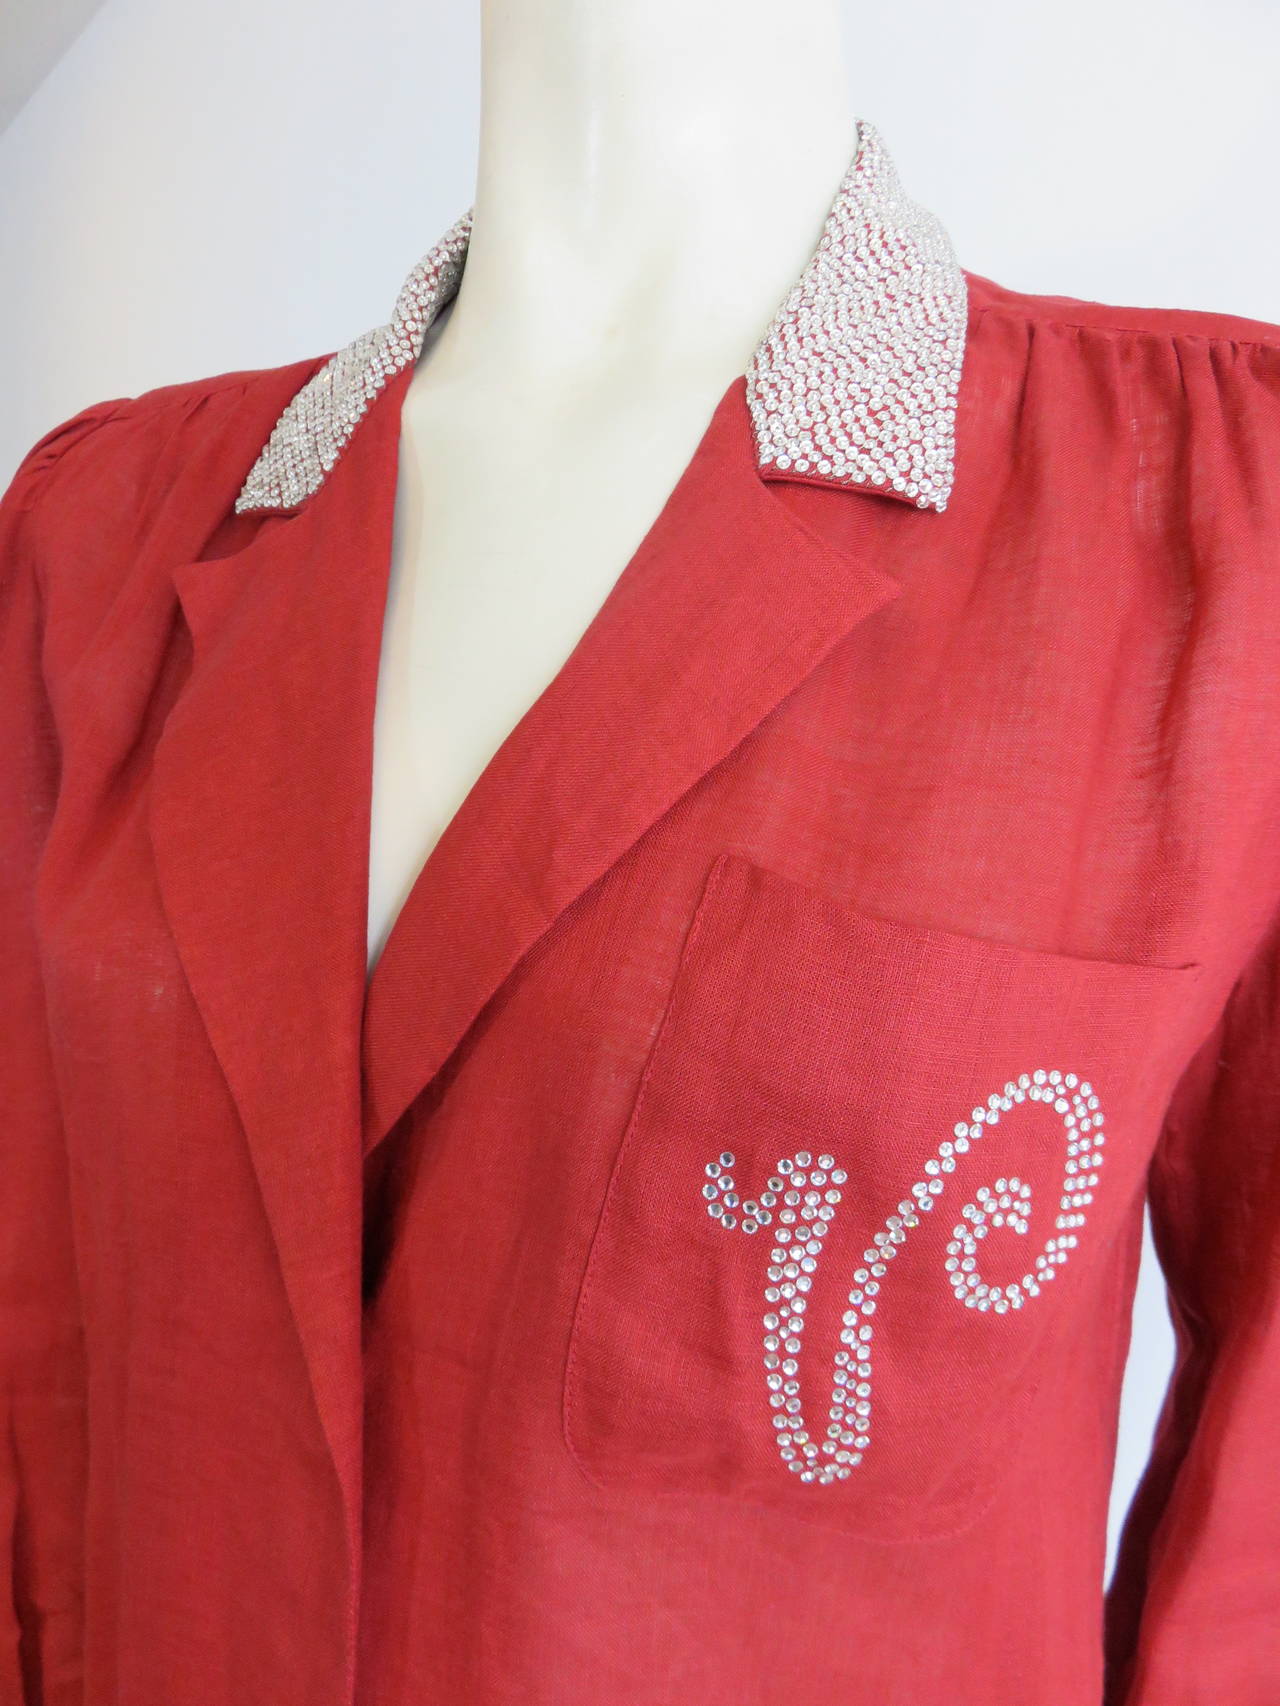 Excellent condition, 1980's VALENTINO Crystal 'V' monogram red linen shirt.

This fabulous shirt features all-over, mini crystal-head embellishments at the top collar with rhinestone 'V' monogram at the left chest.

Valentino red, linen